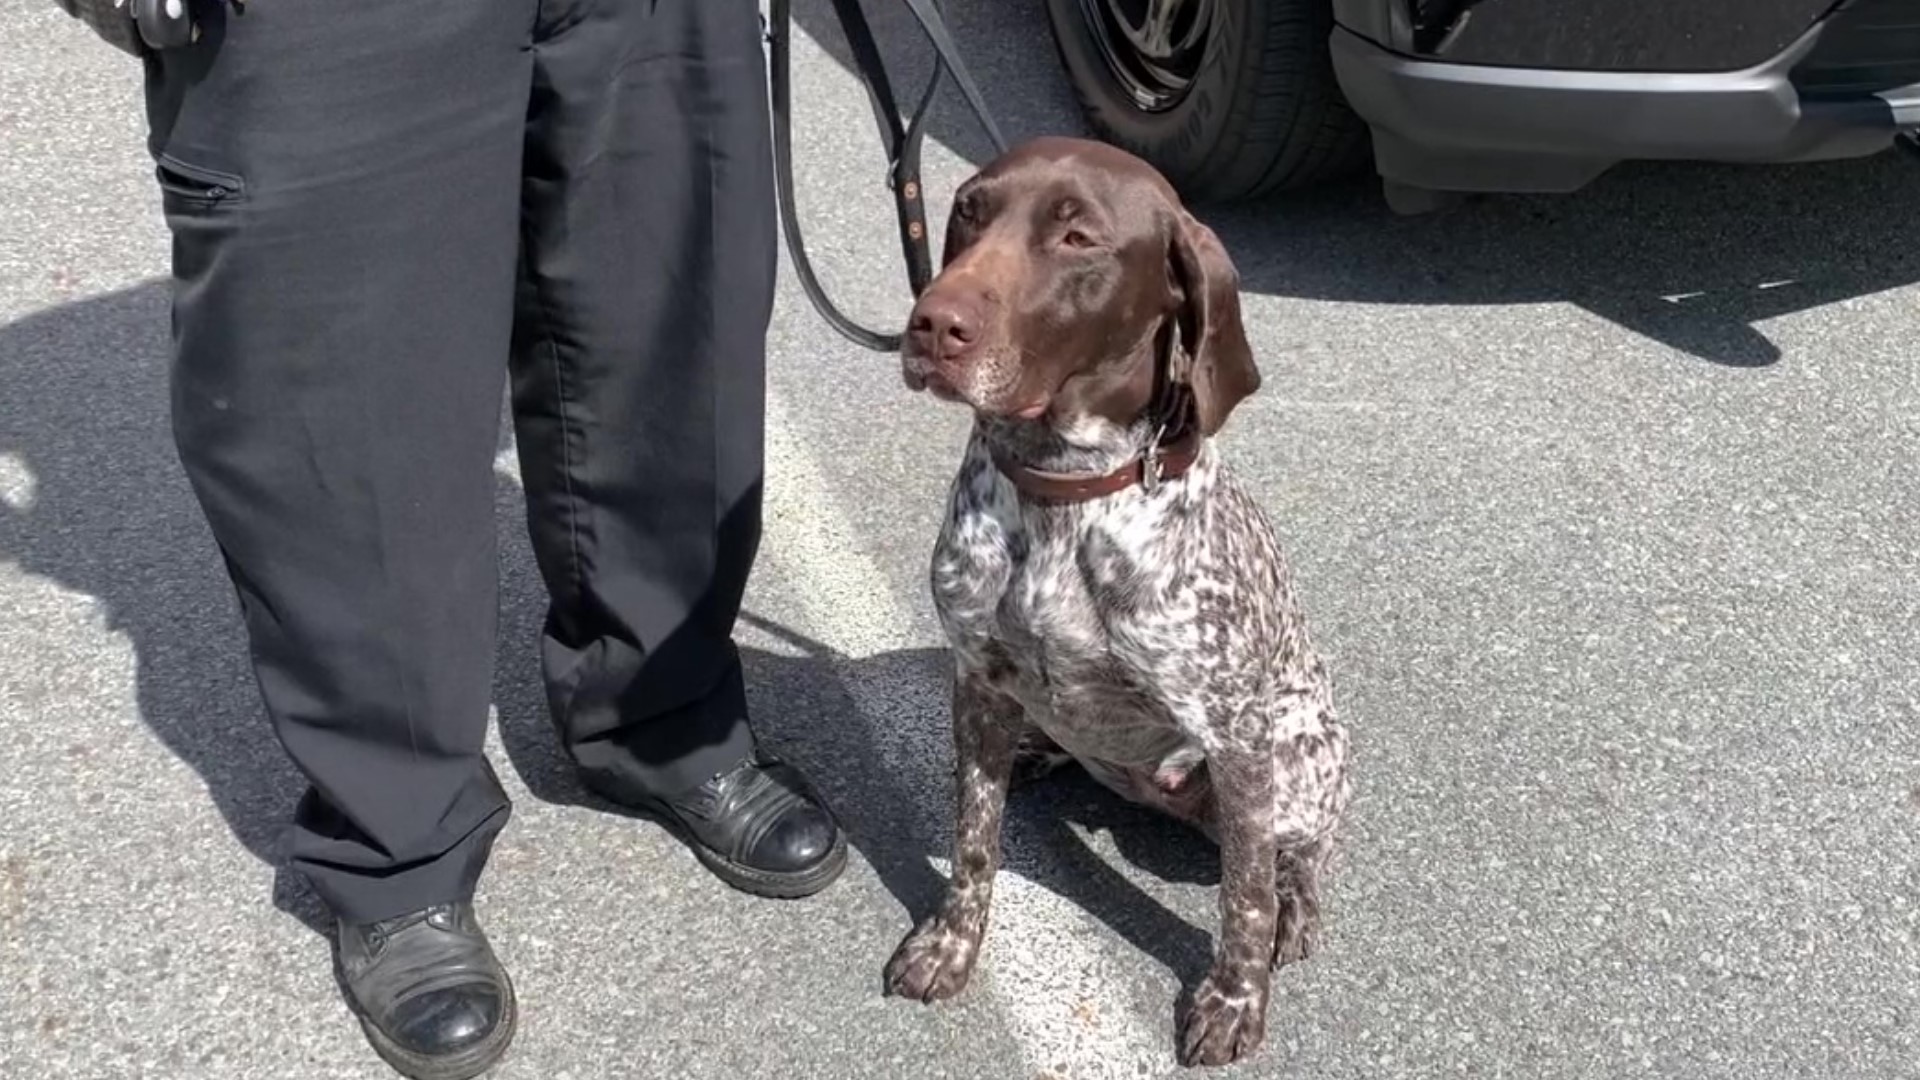 The newest member of a police department in Luzerne County comes from the Netherlands, and she specializes in narcotics traffic stops and playtime.